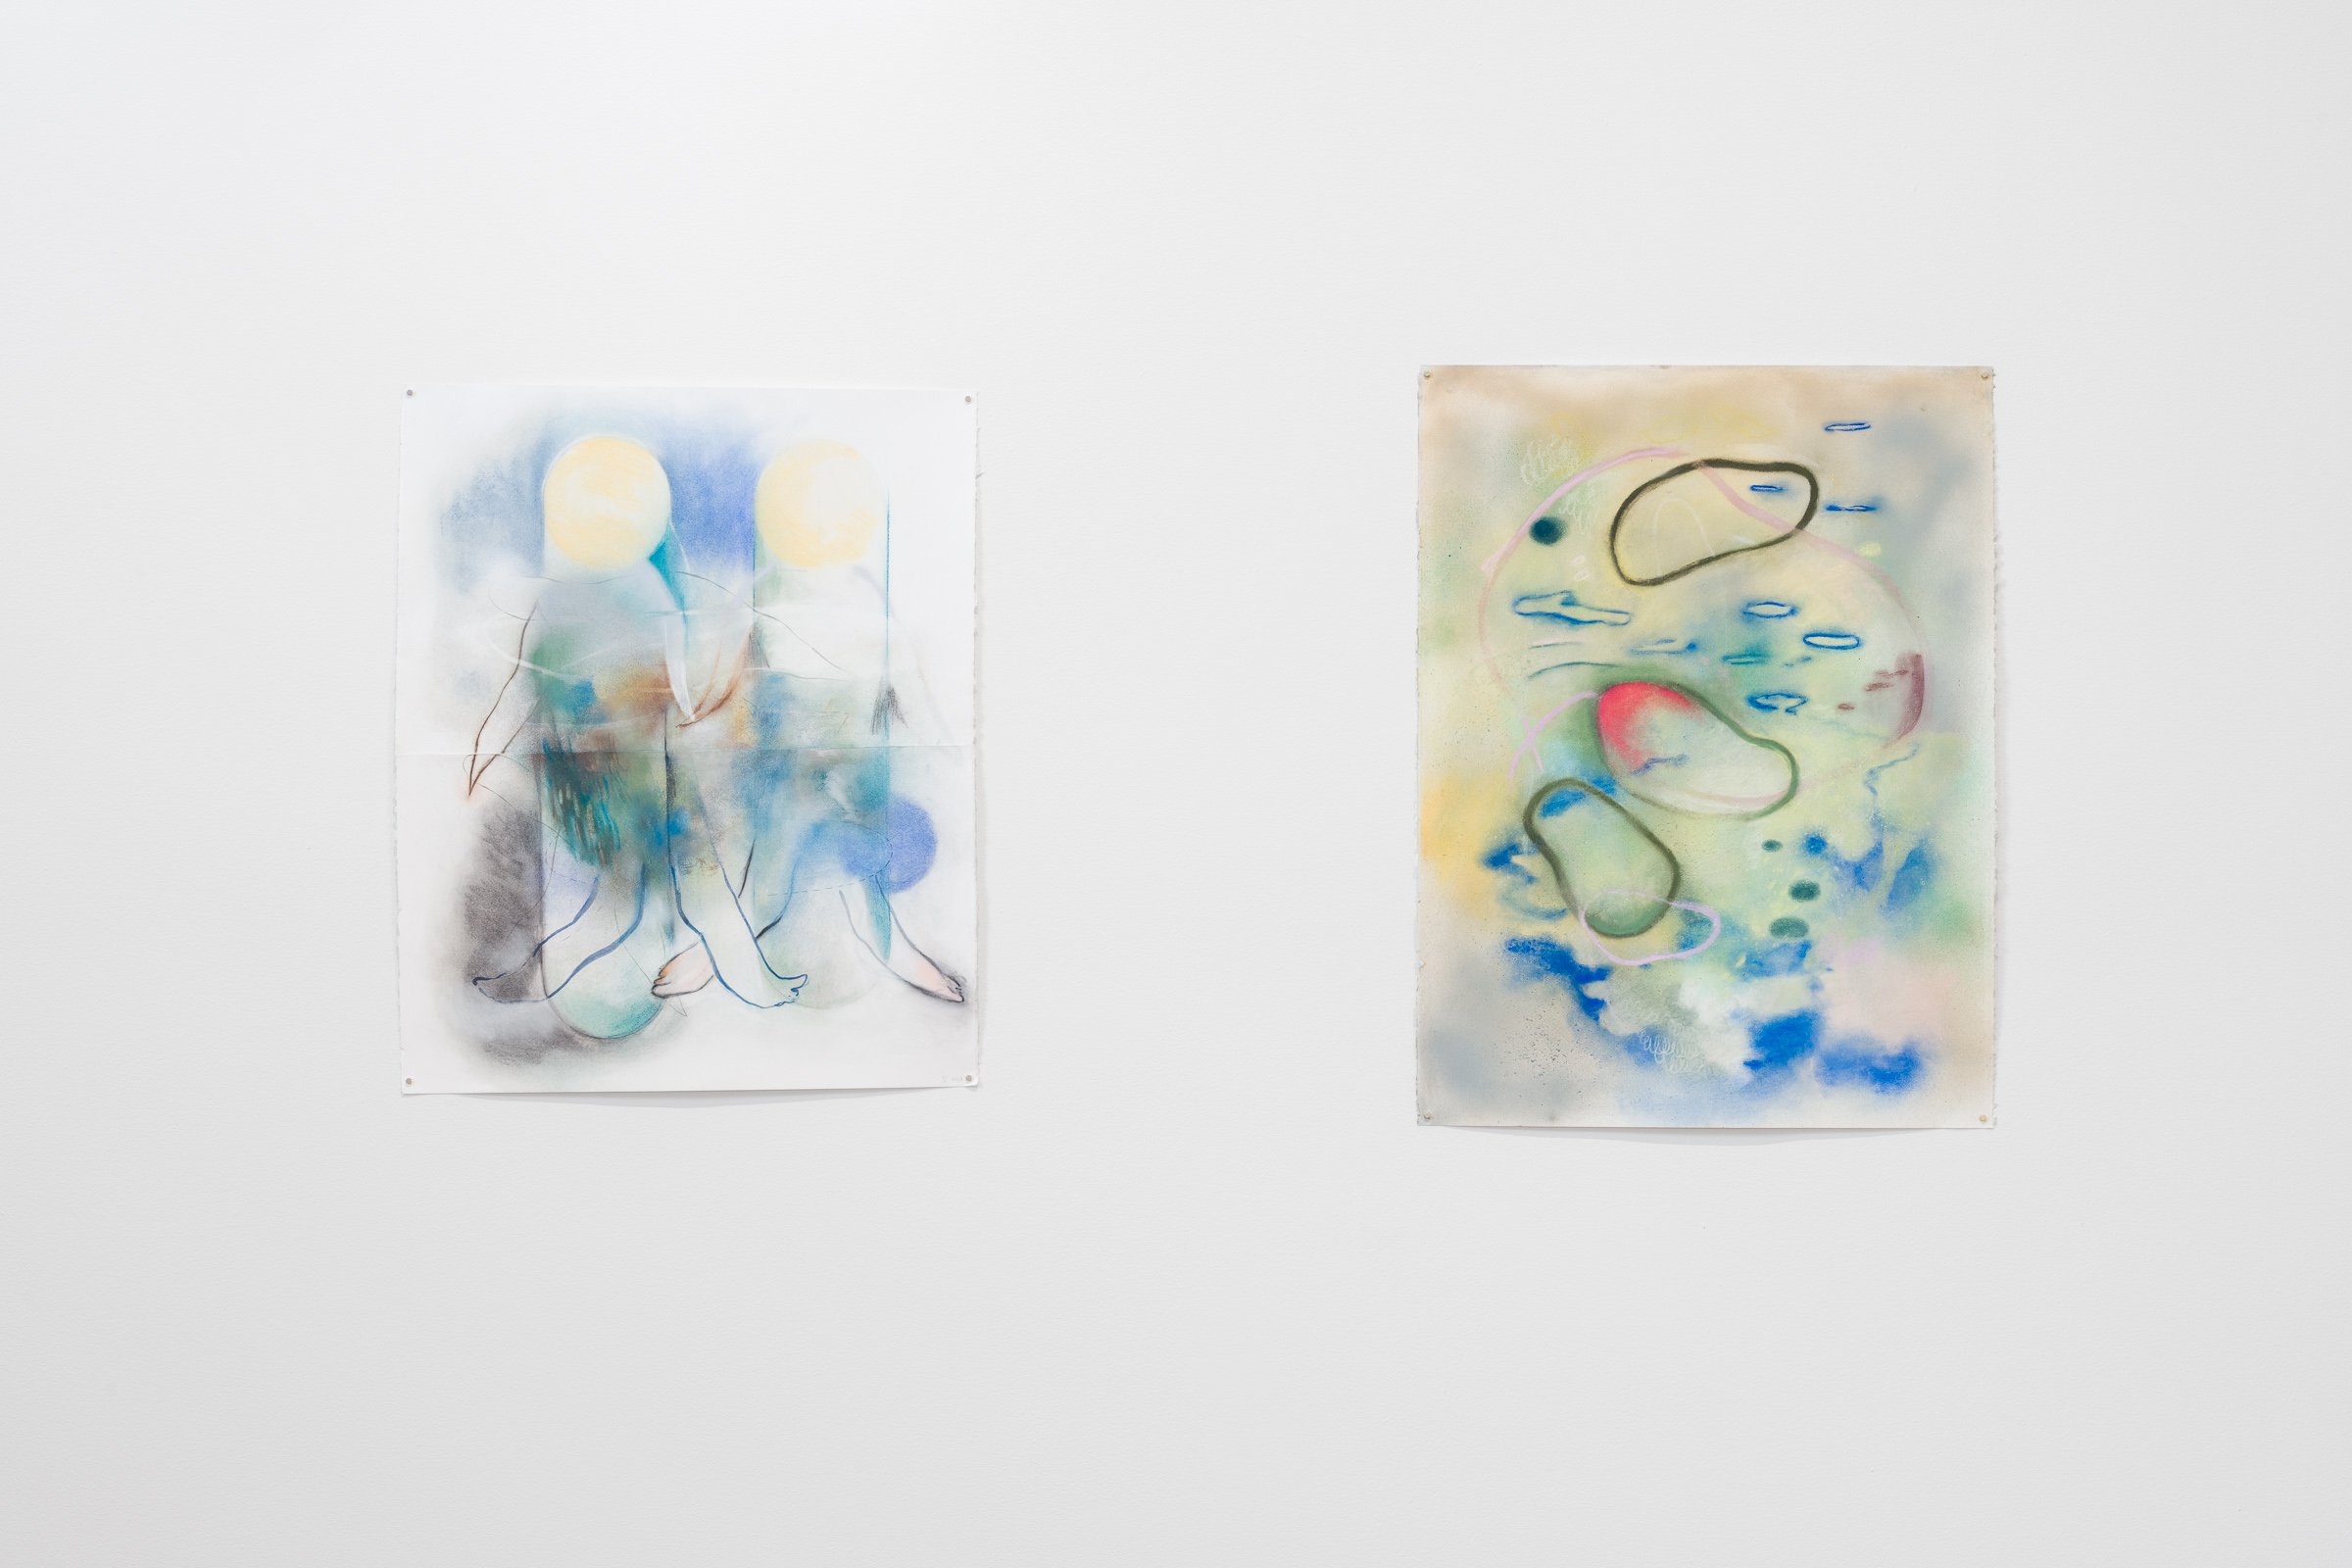  Installation view of  Gathering near and far, still  by April Matisz showing (l to r)   Cloud-thinking , pastel and spray paint on paper 2022 and  Together we are Moons , pastel and spray paint on paper, 2022. Courtesy of the artist. Photo by Blaine